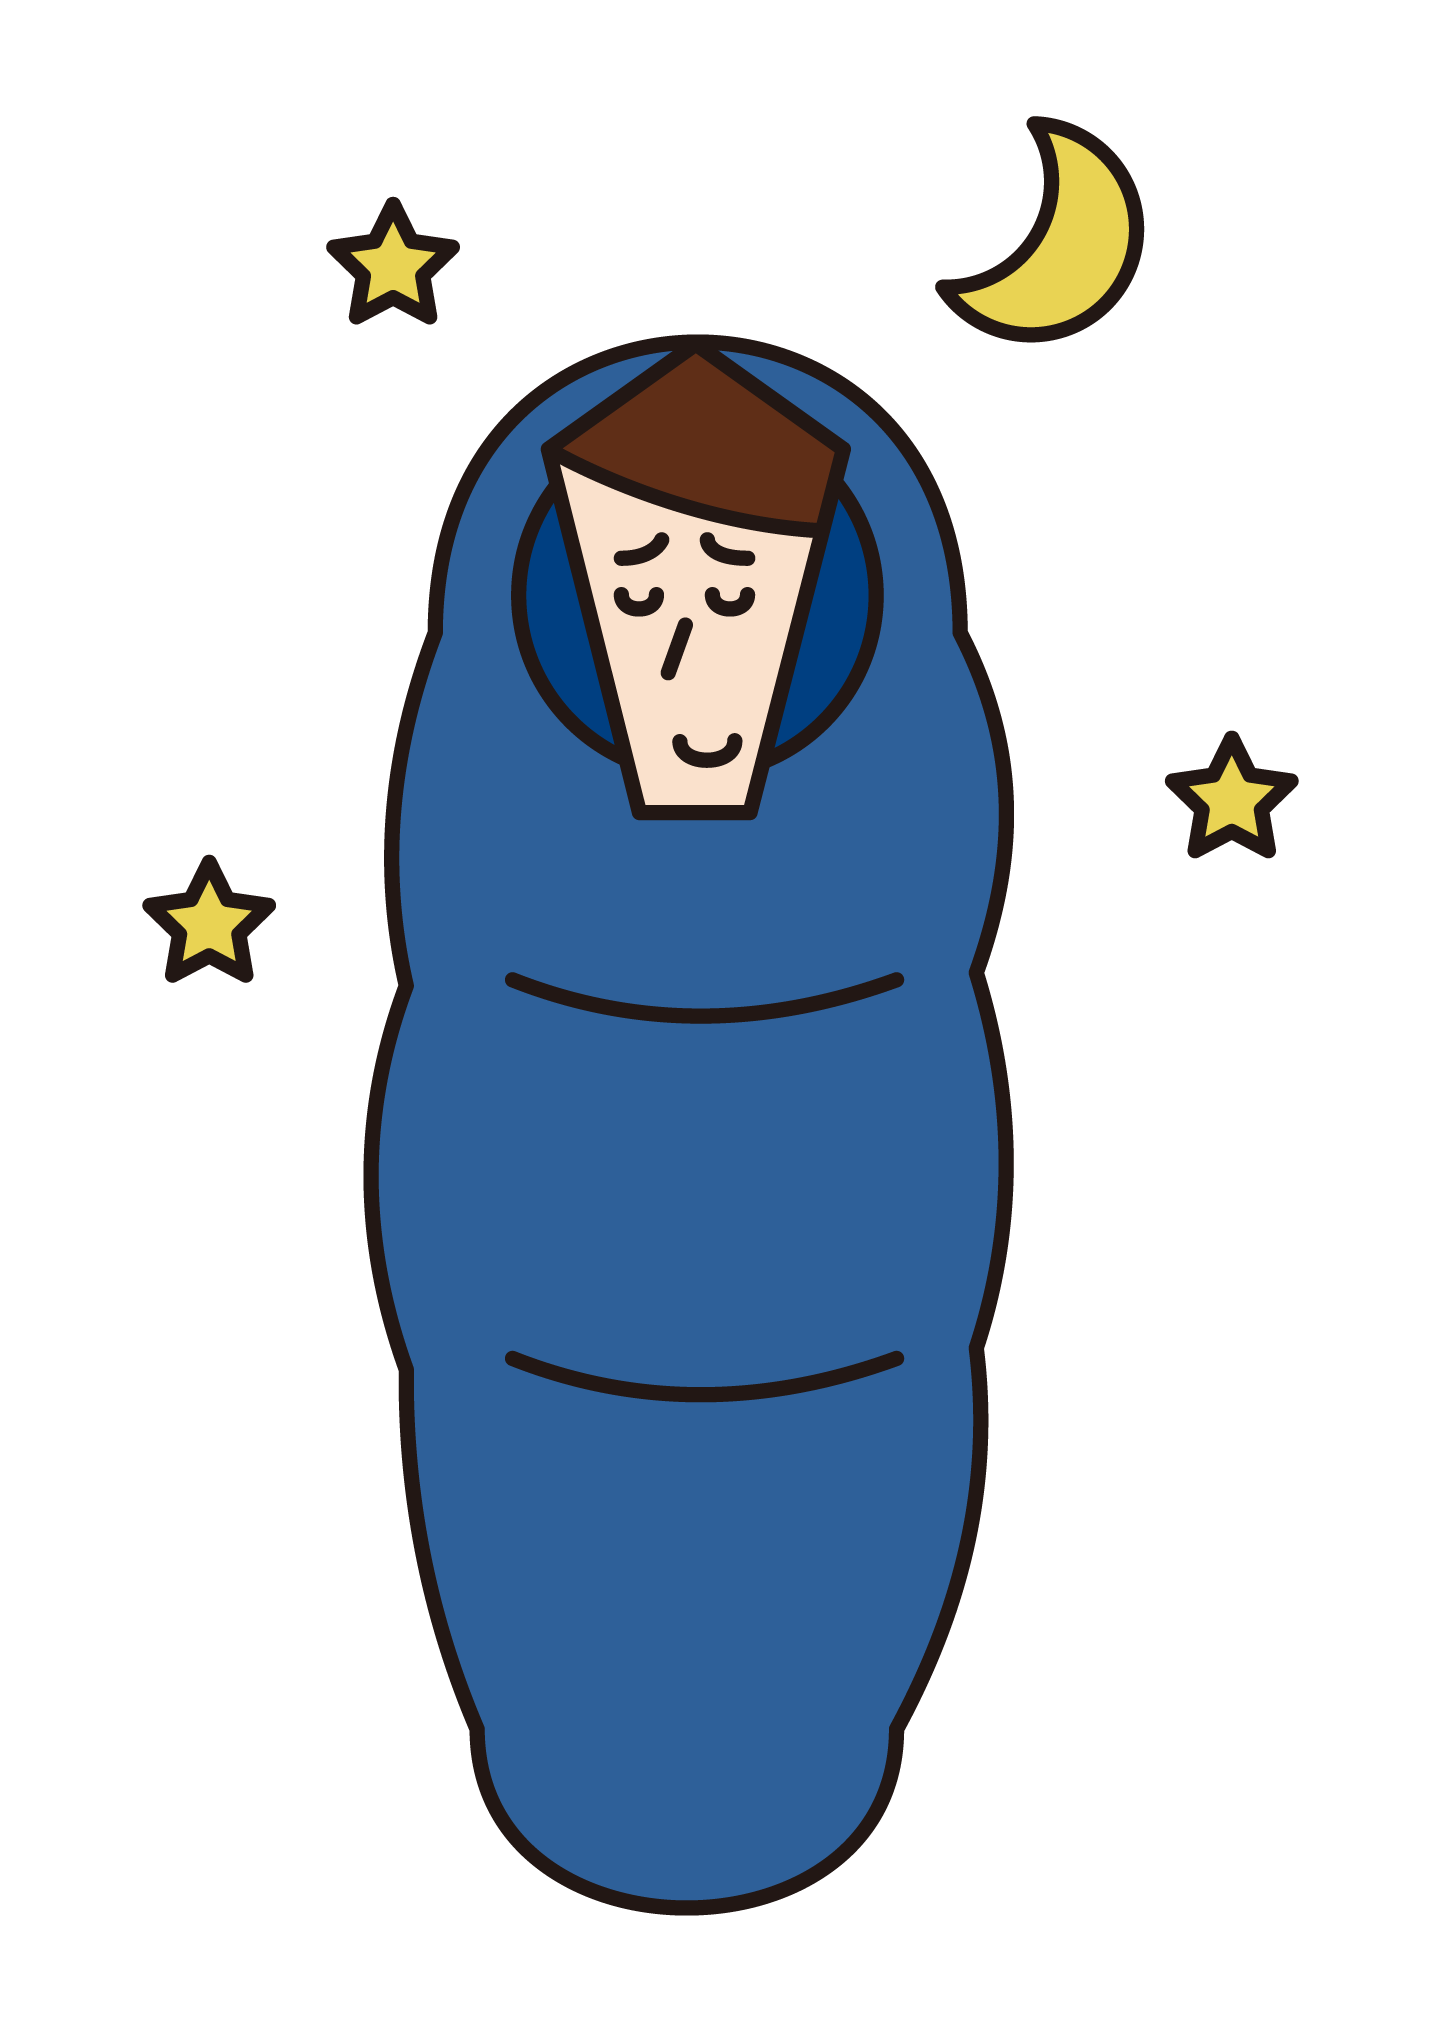 Illustration of a man in a sleeping bag